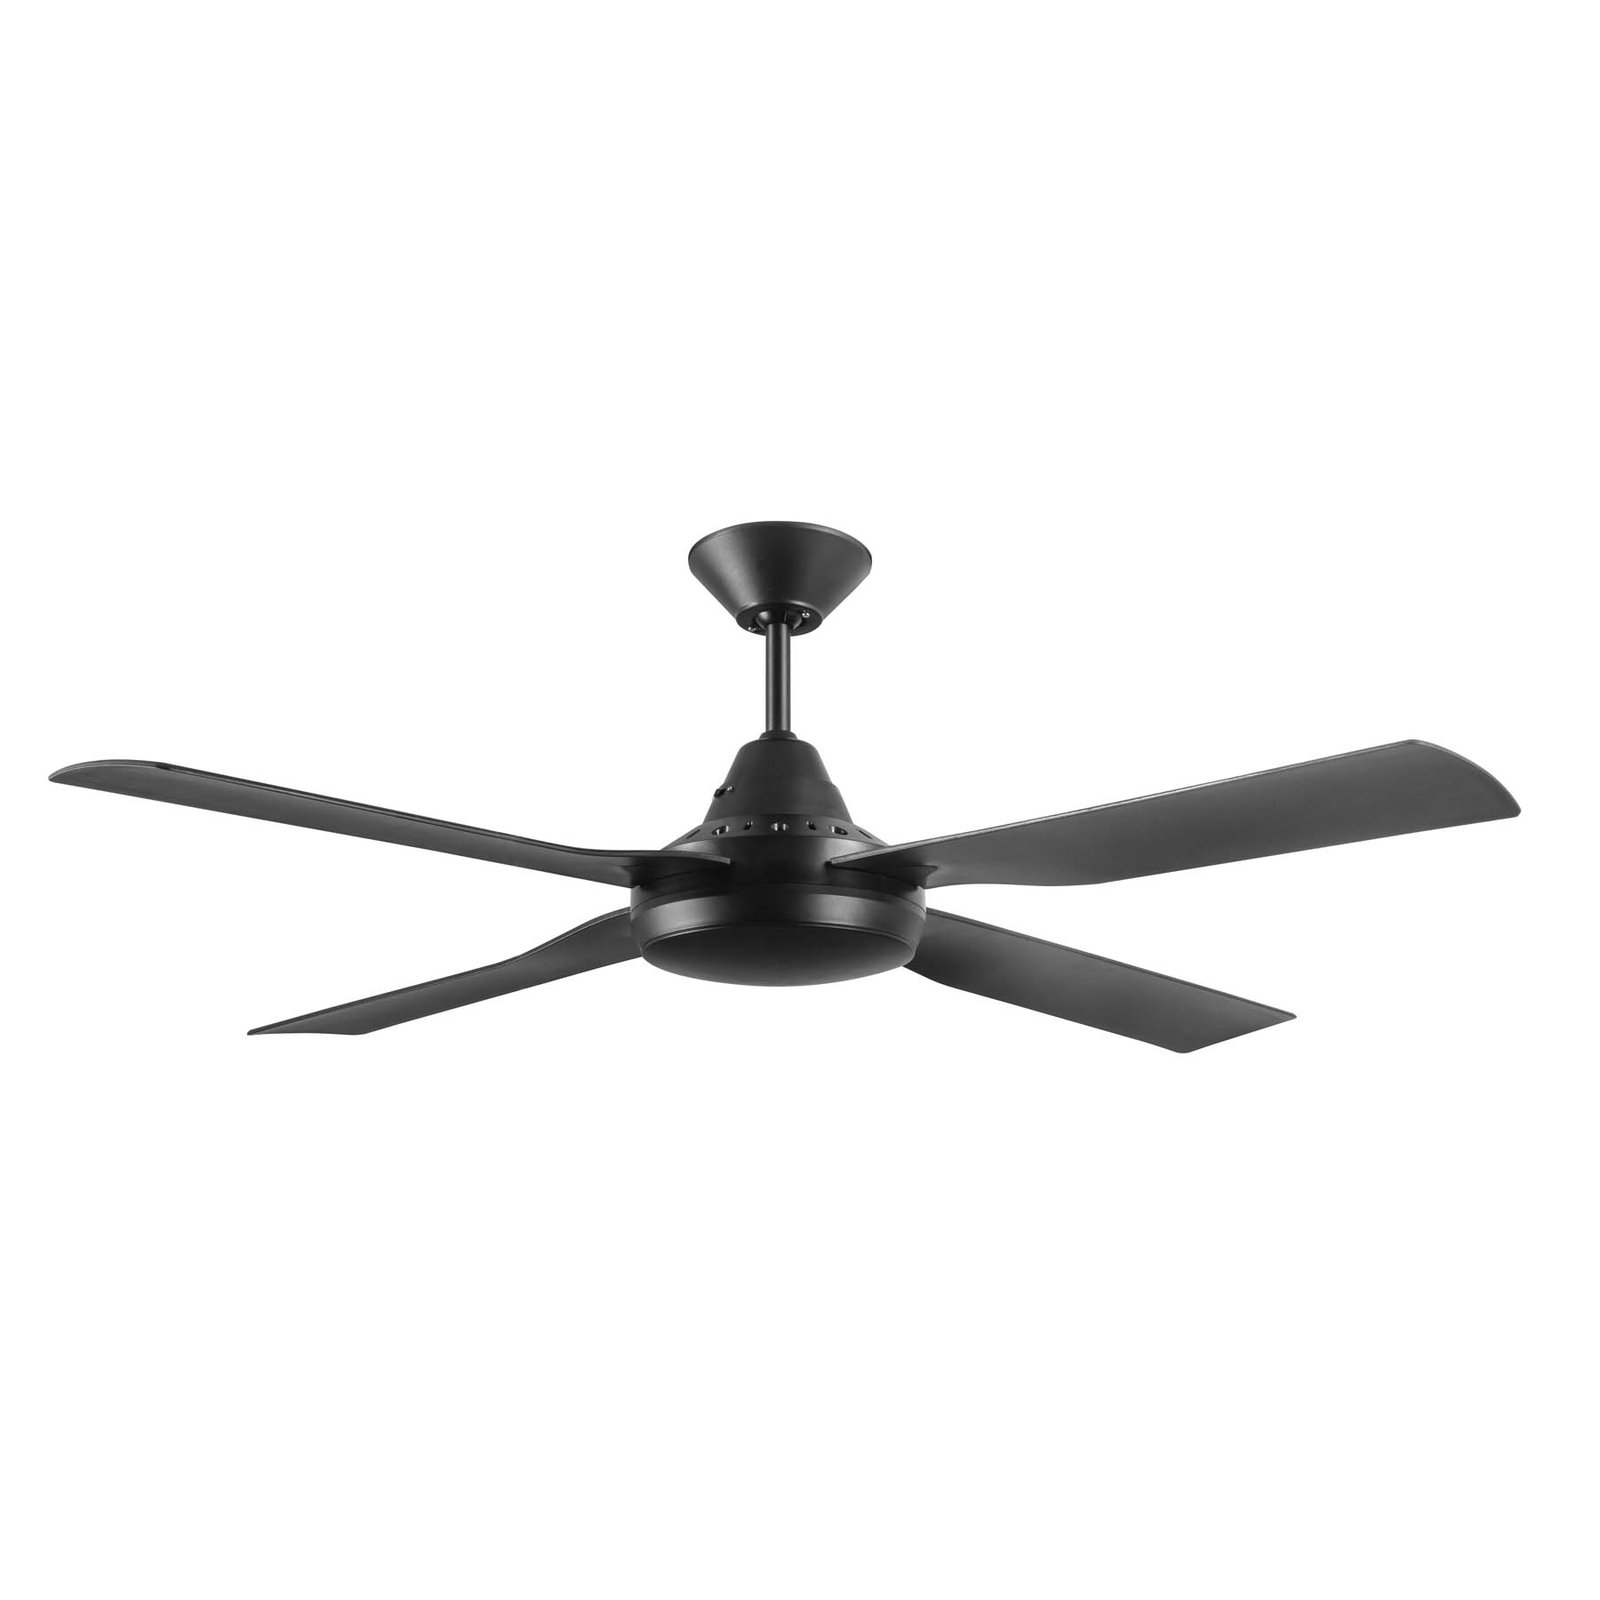 Beacon ceiling fan with light Moonah, black, quiet